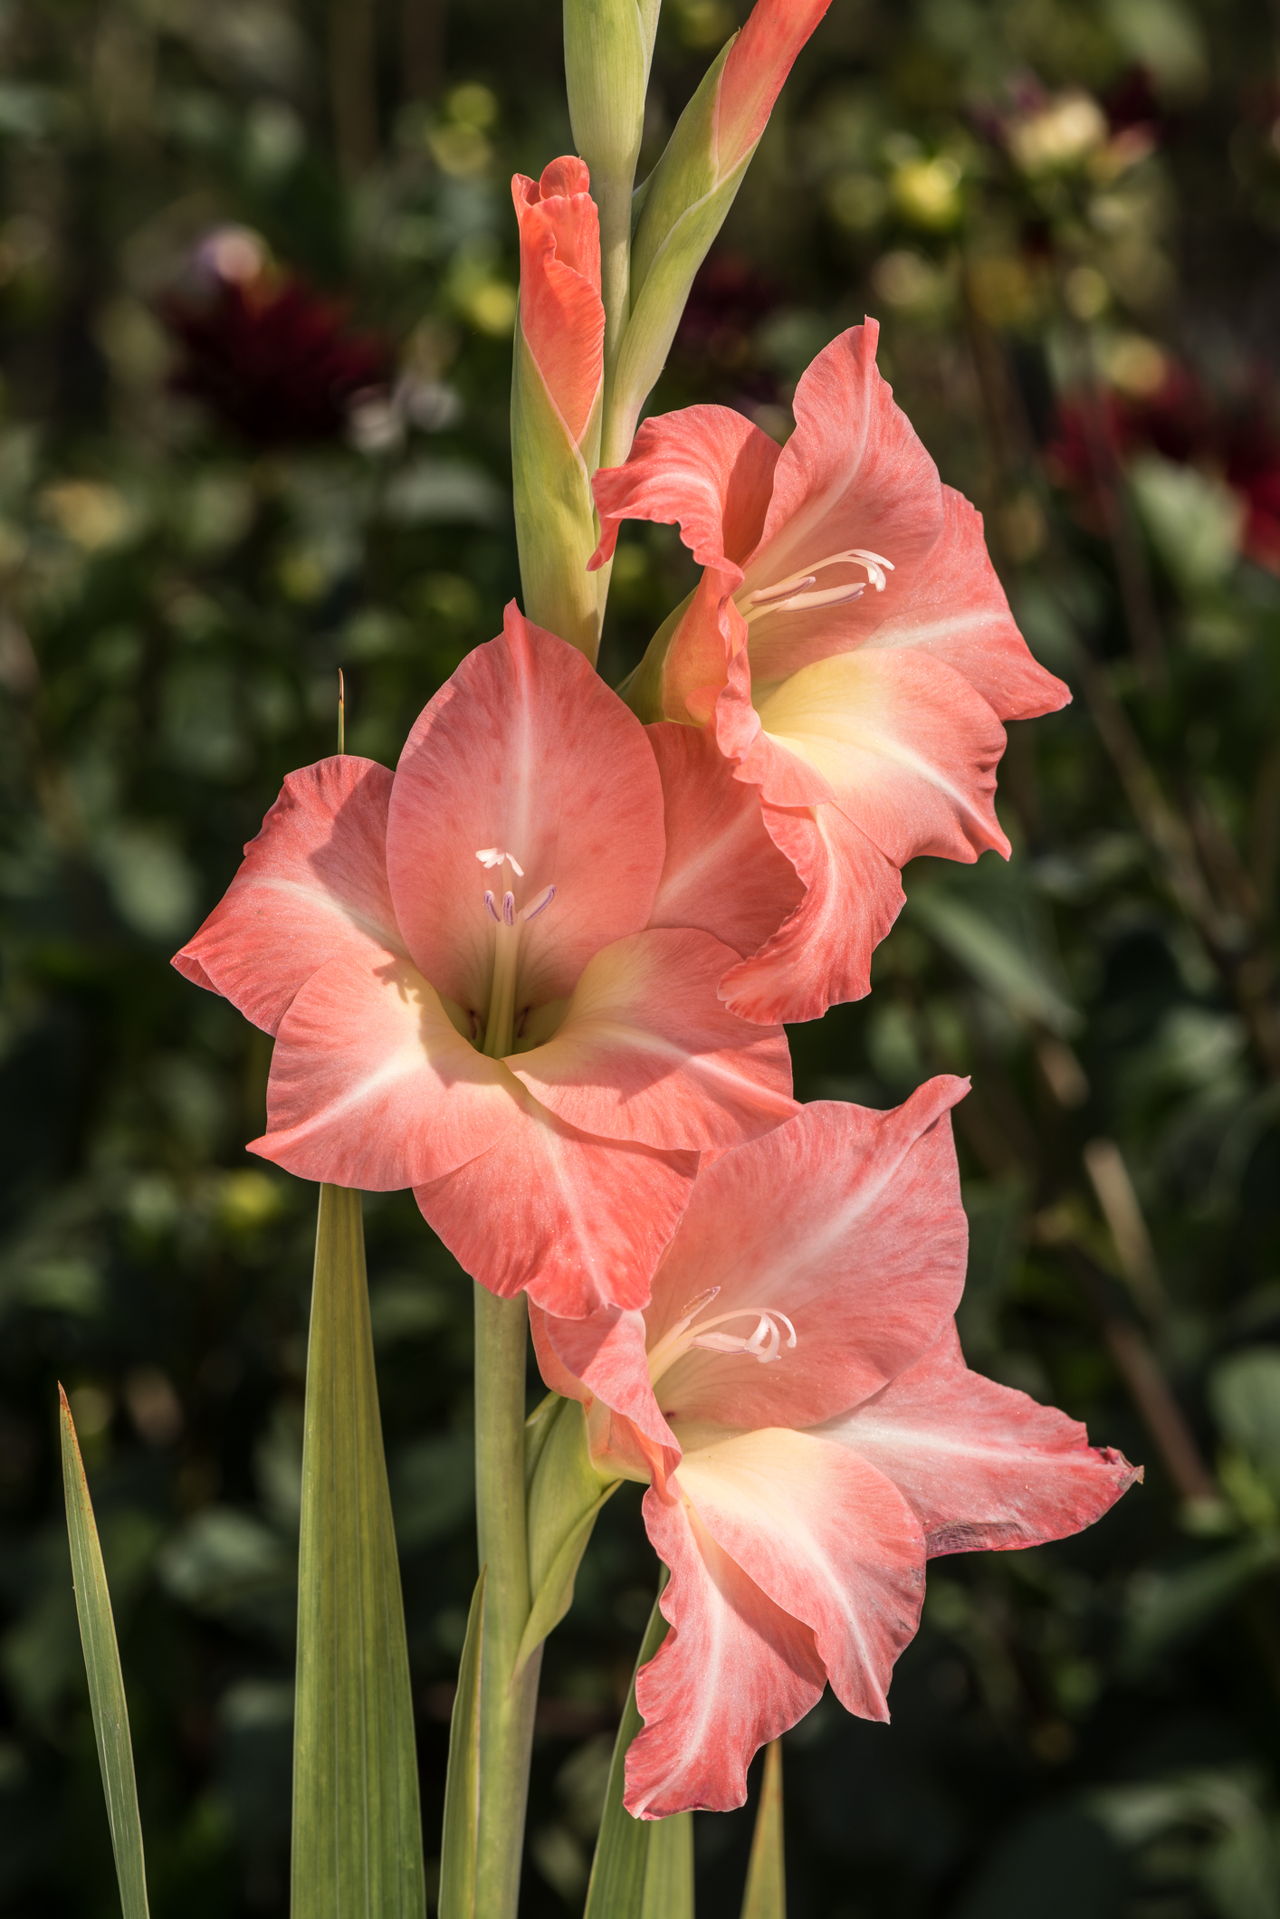 How to Transplant a Gladiolus in 7 Simple Steps